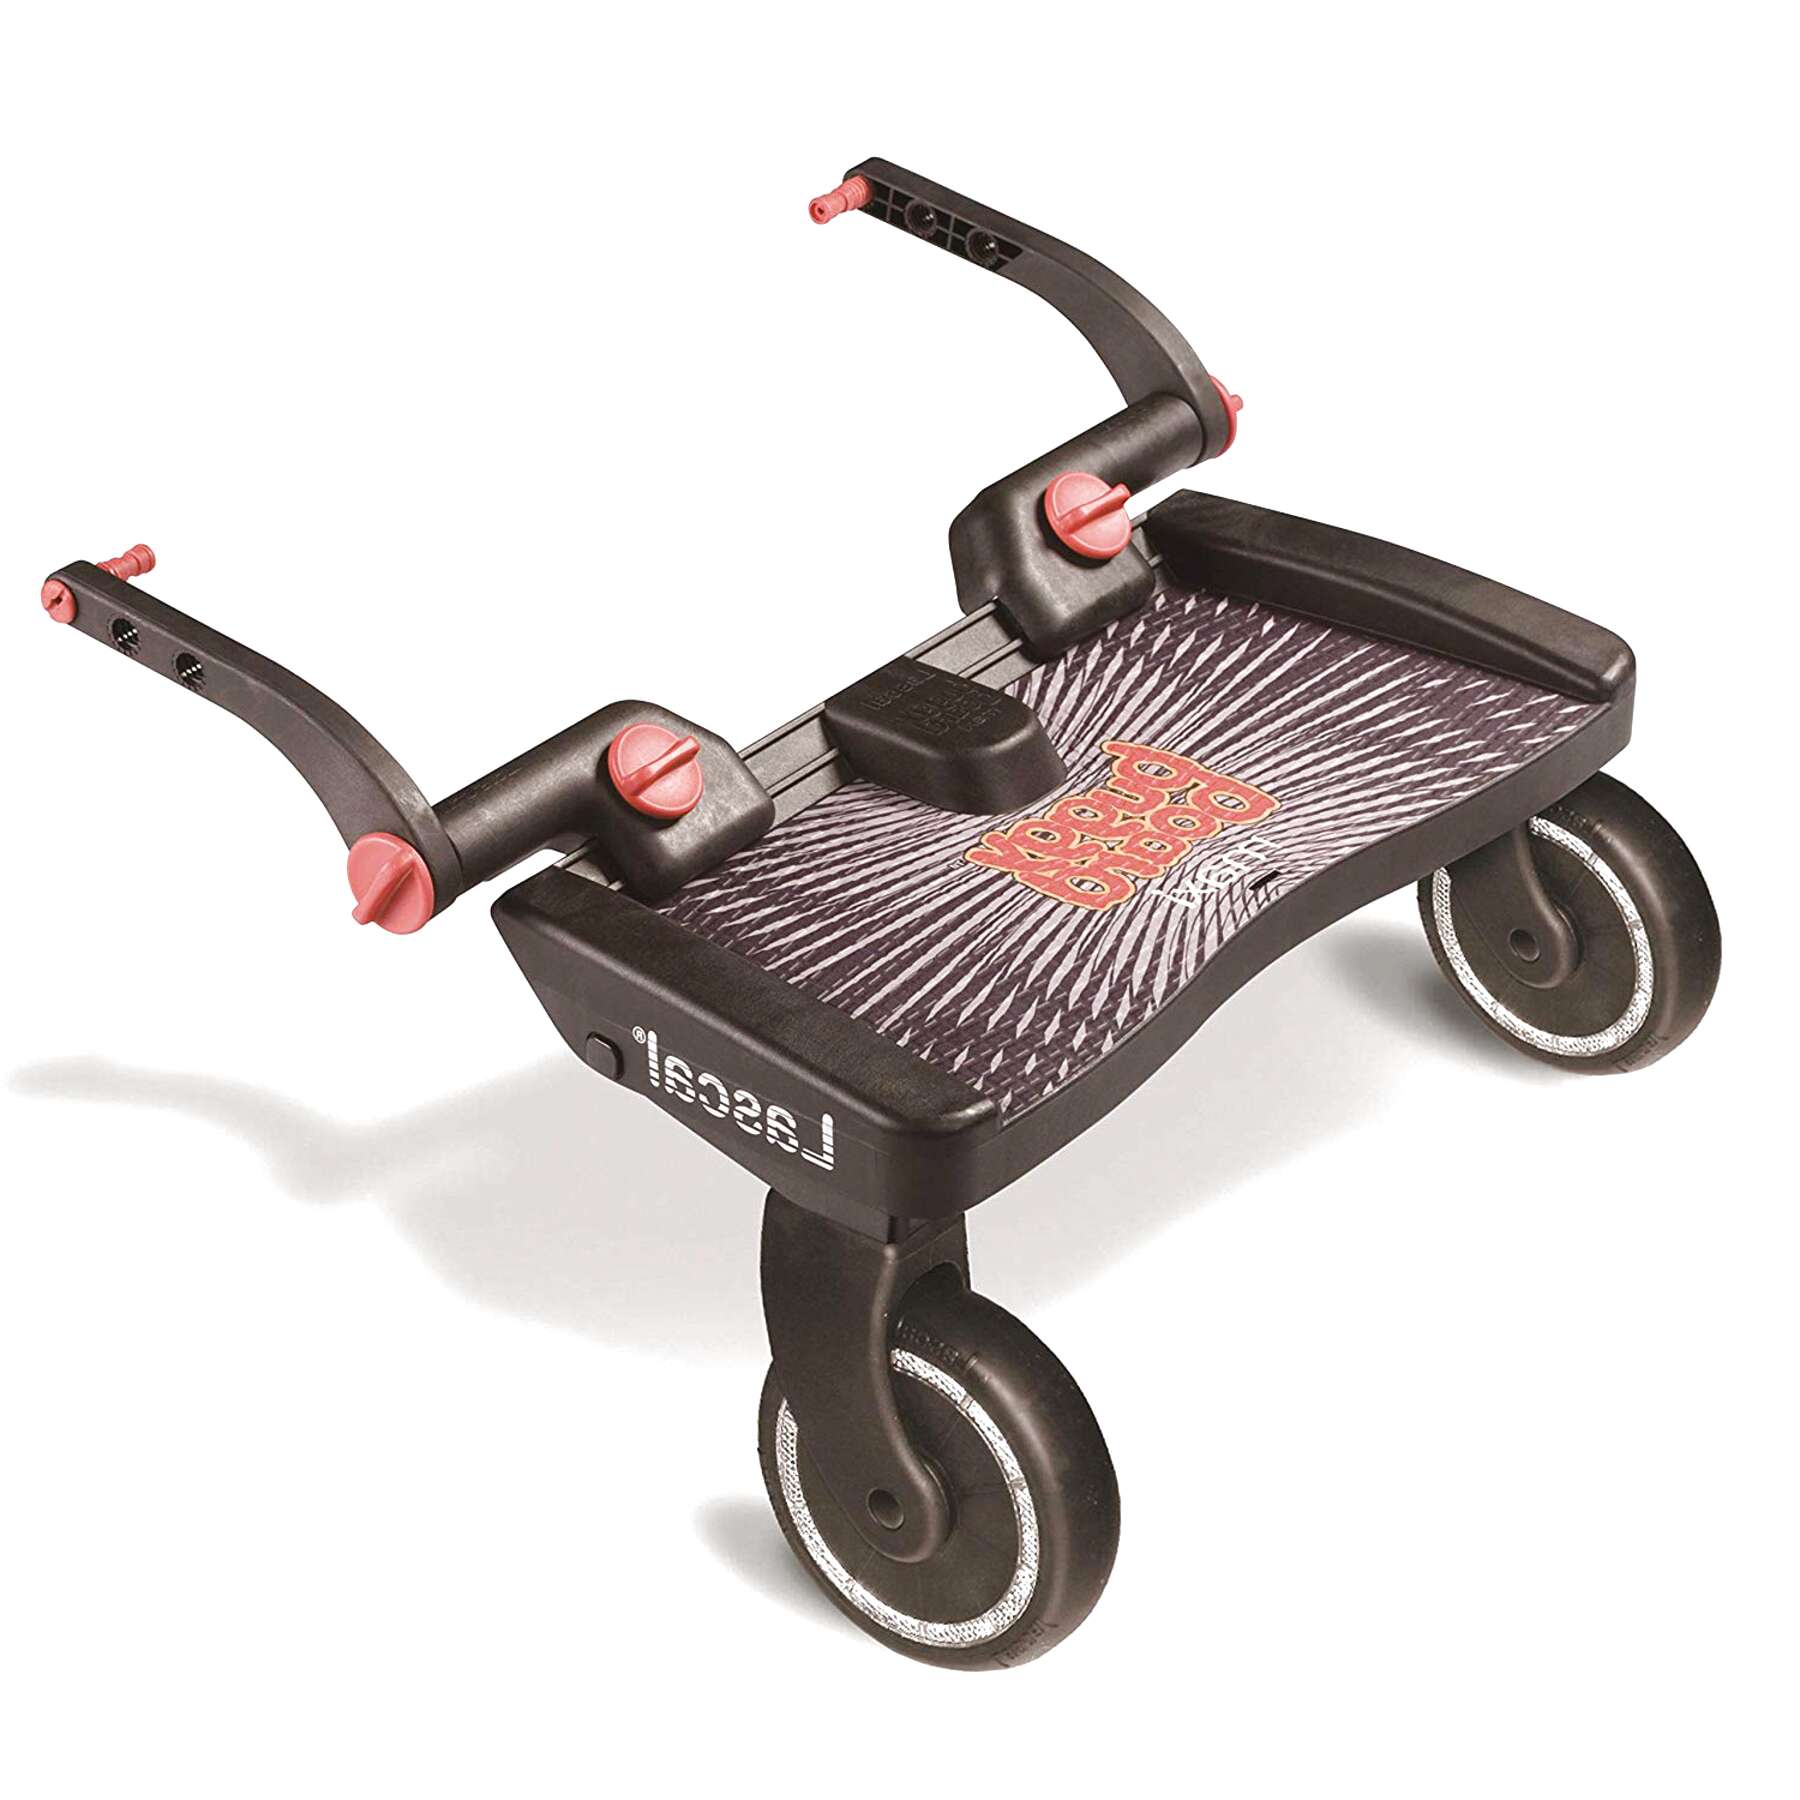 second hand buggy board